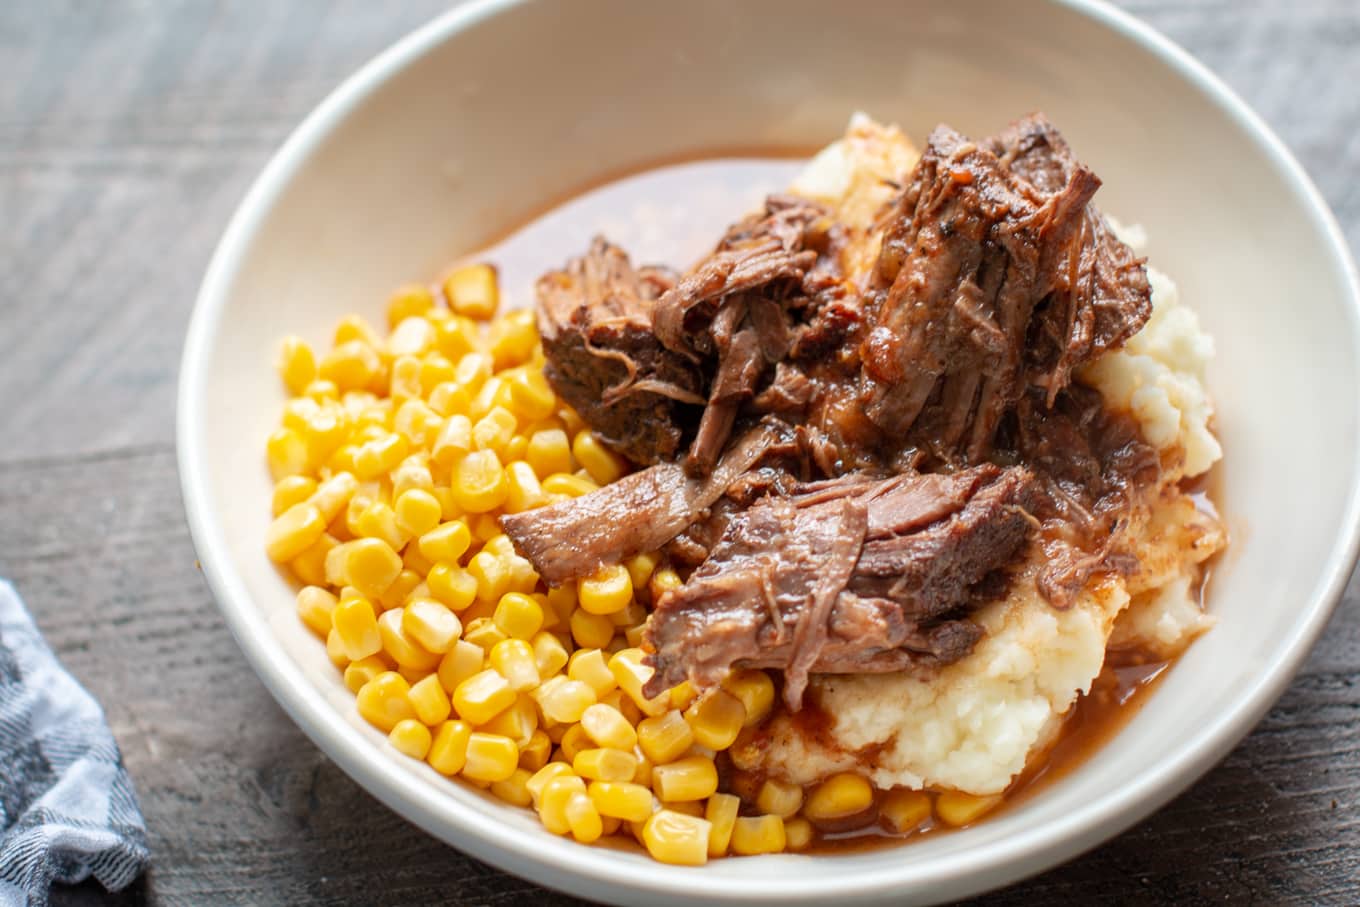 bowl with mashed potaotes, shredded beef and corn.